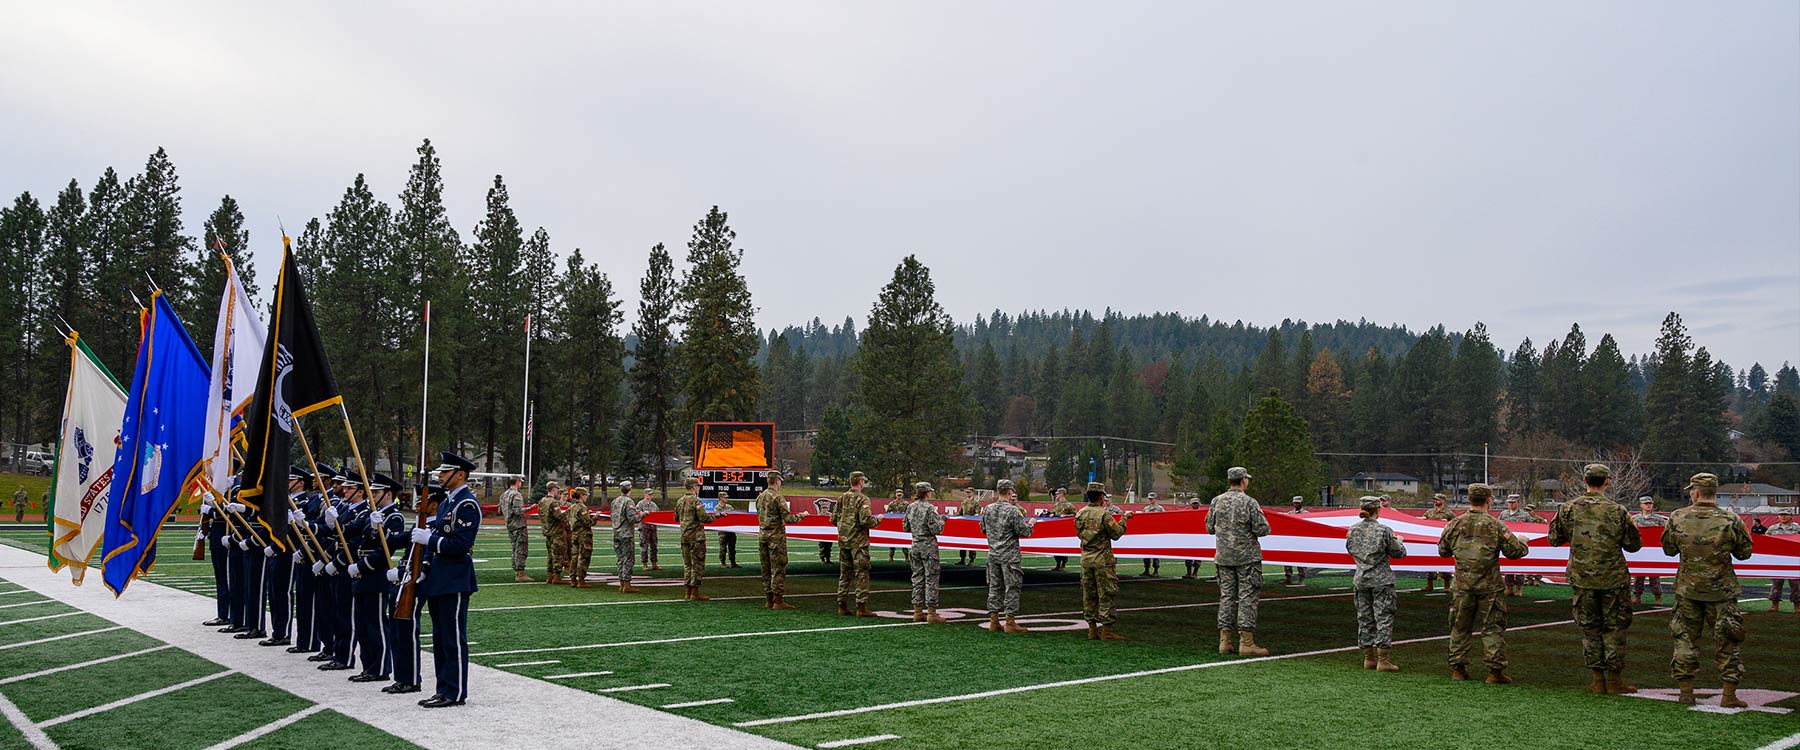 Officers stand with flags near a football field as military members hold a large American flag across the field.